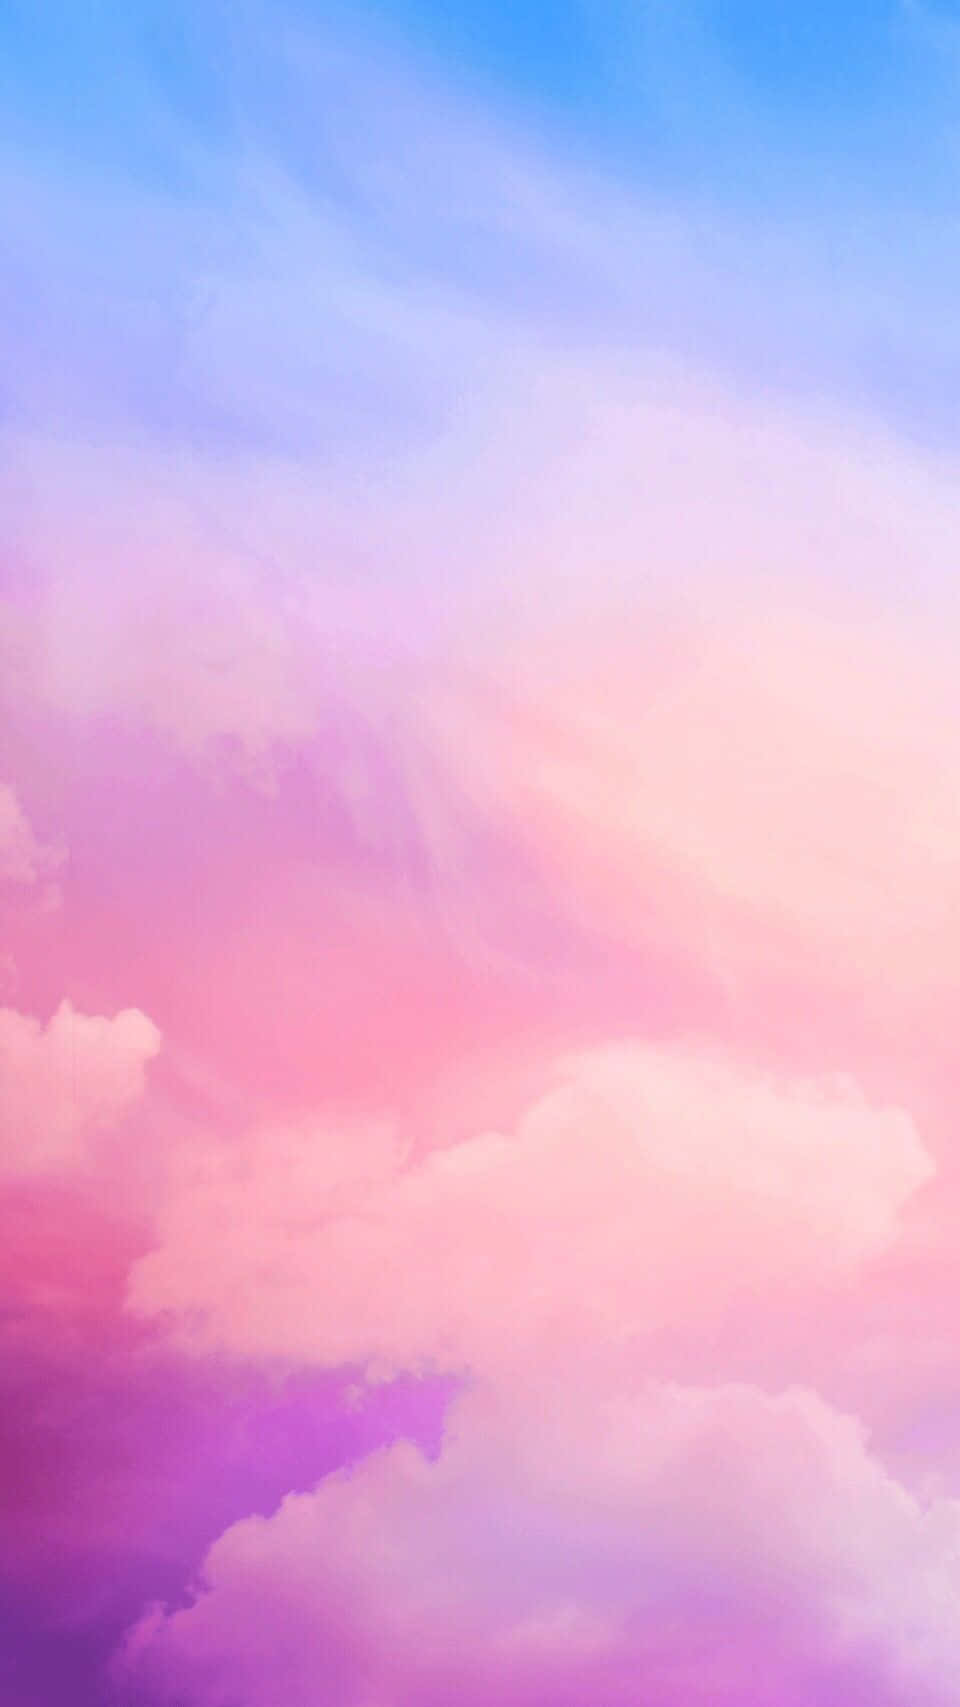 Download Pink And Blue Clouds In Sky Wallpaper